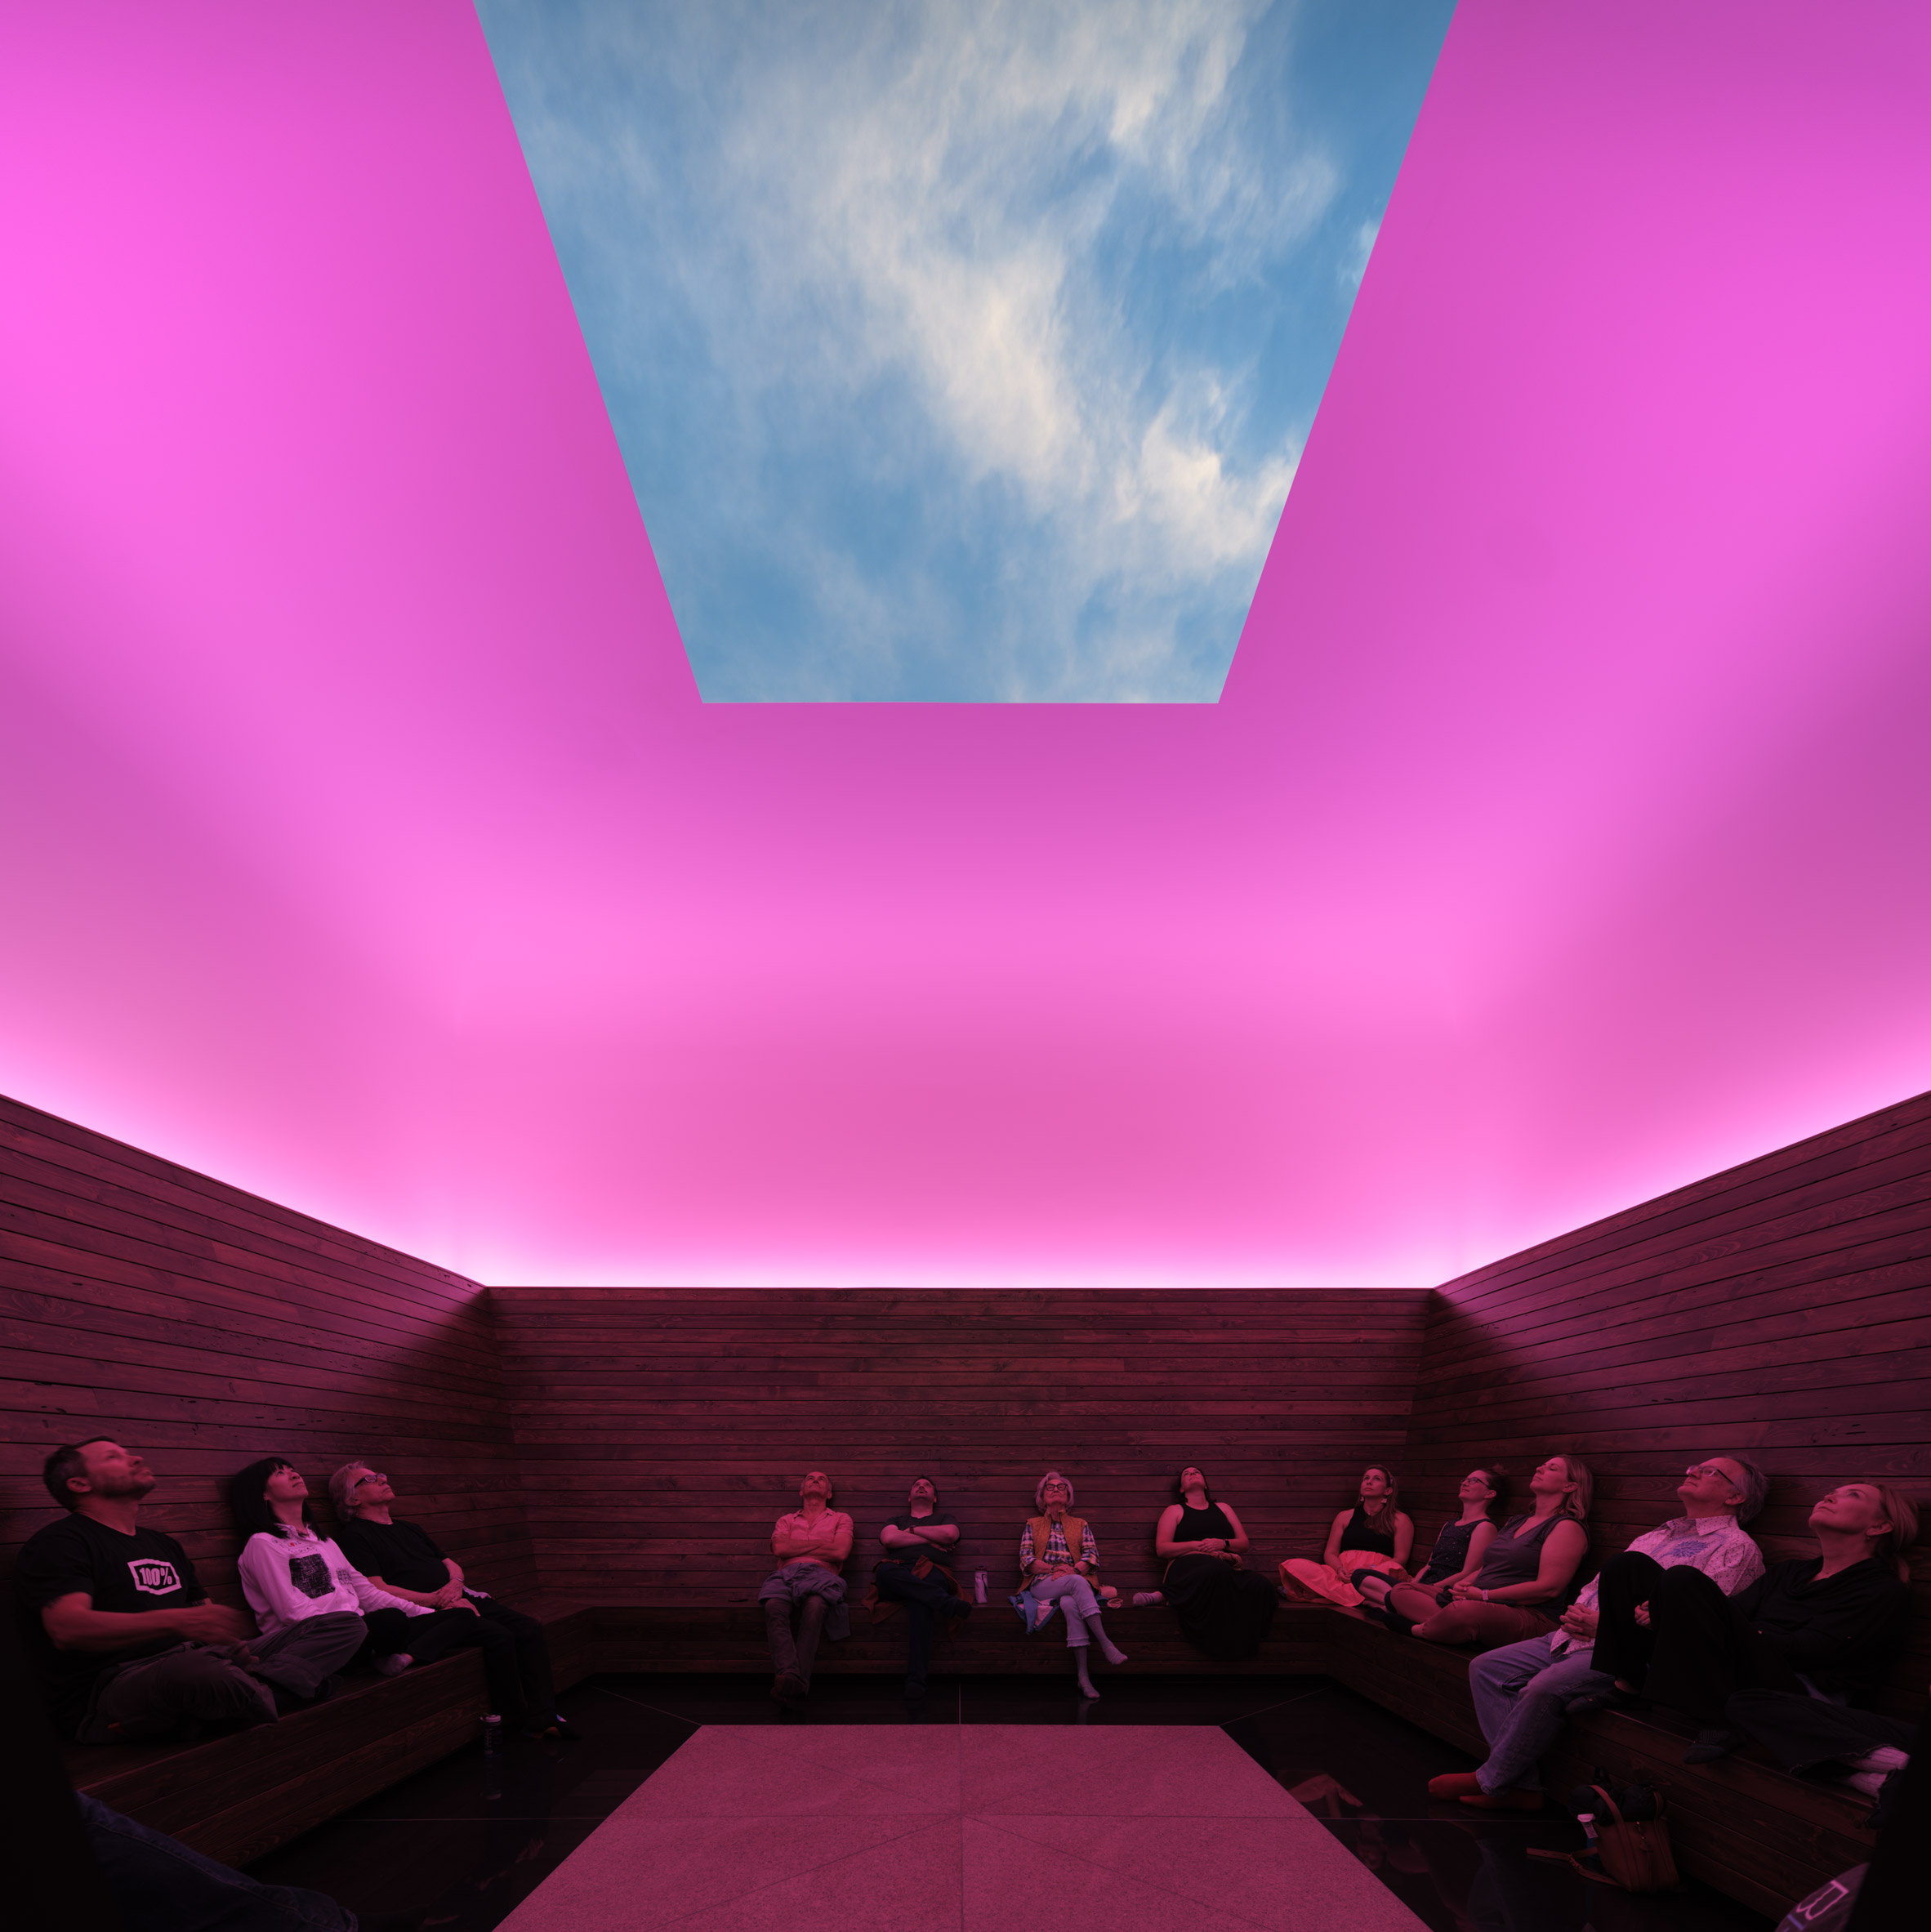 Skyspace chamber by James Turrell